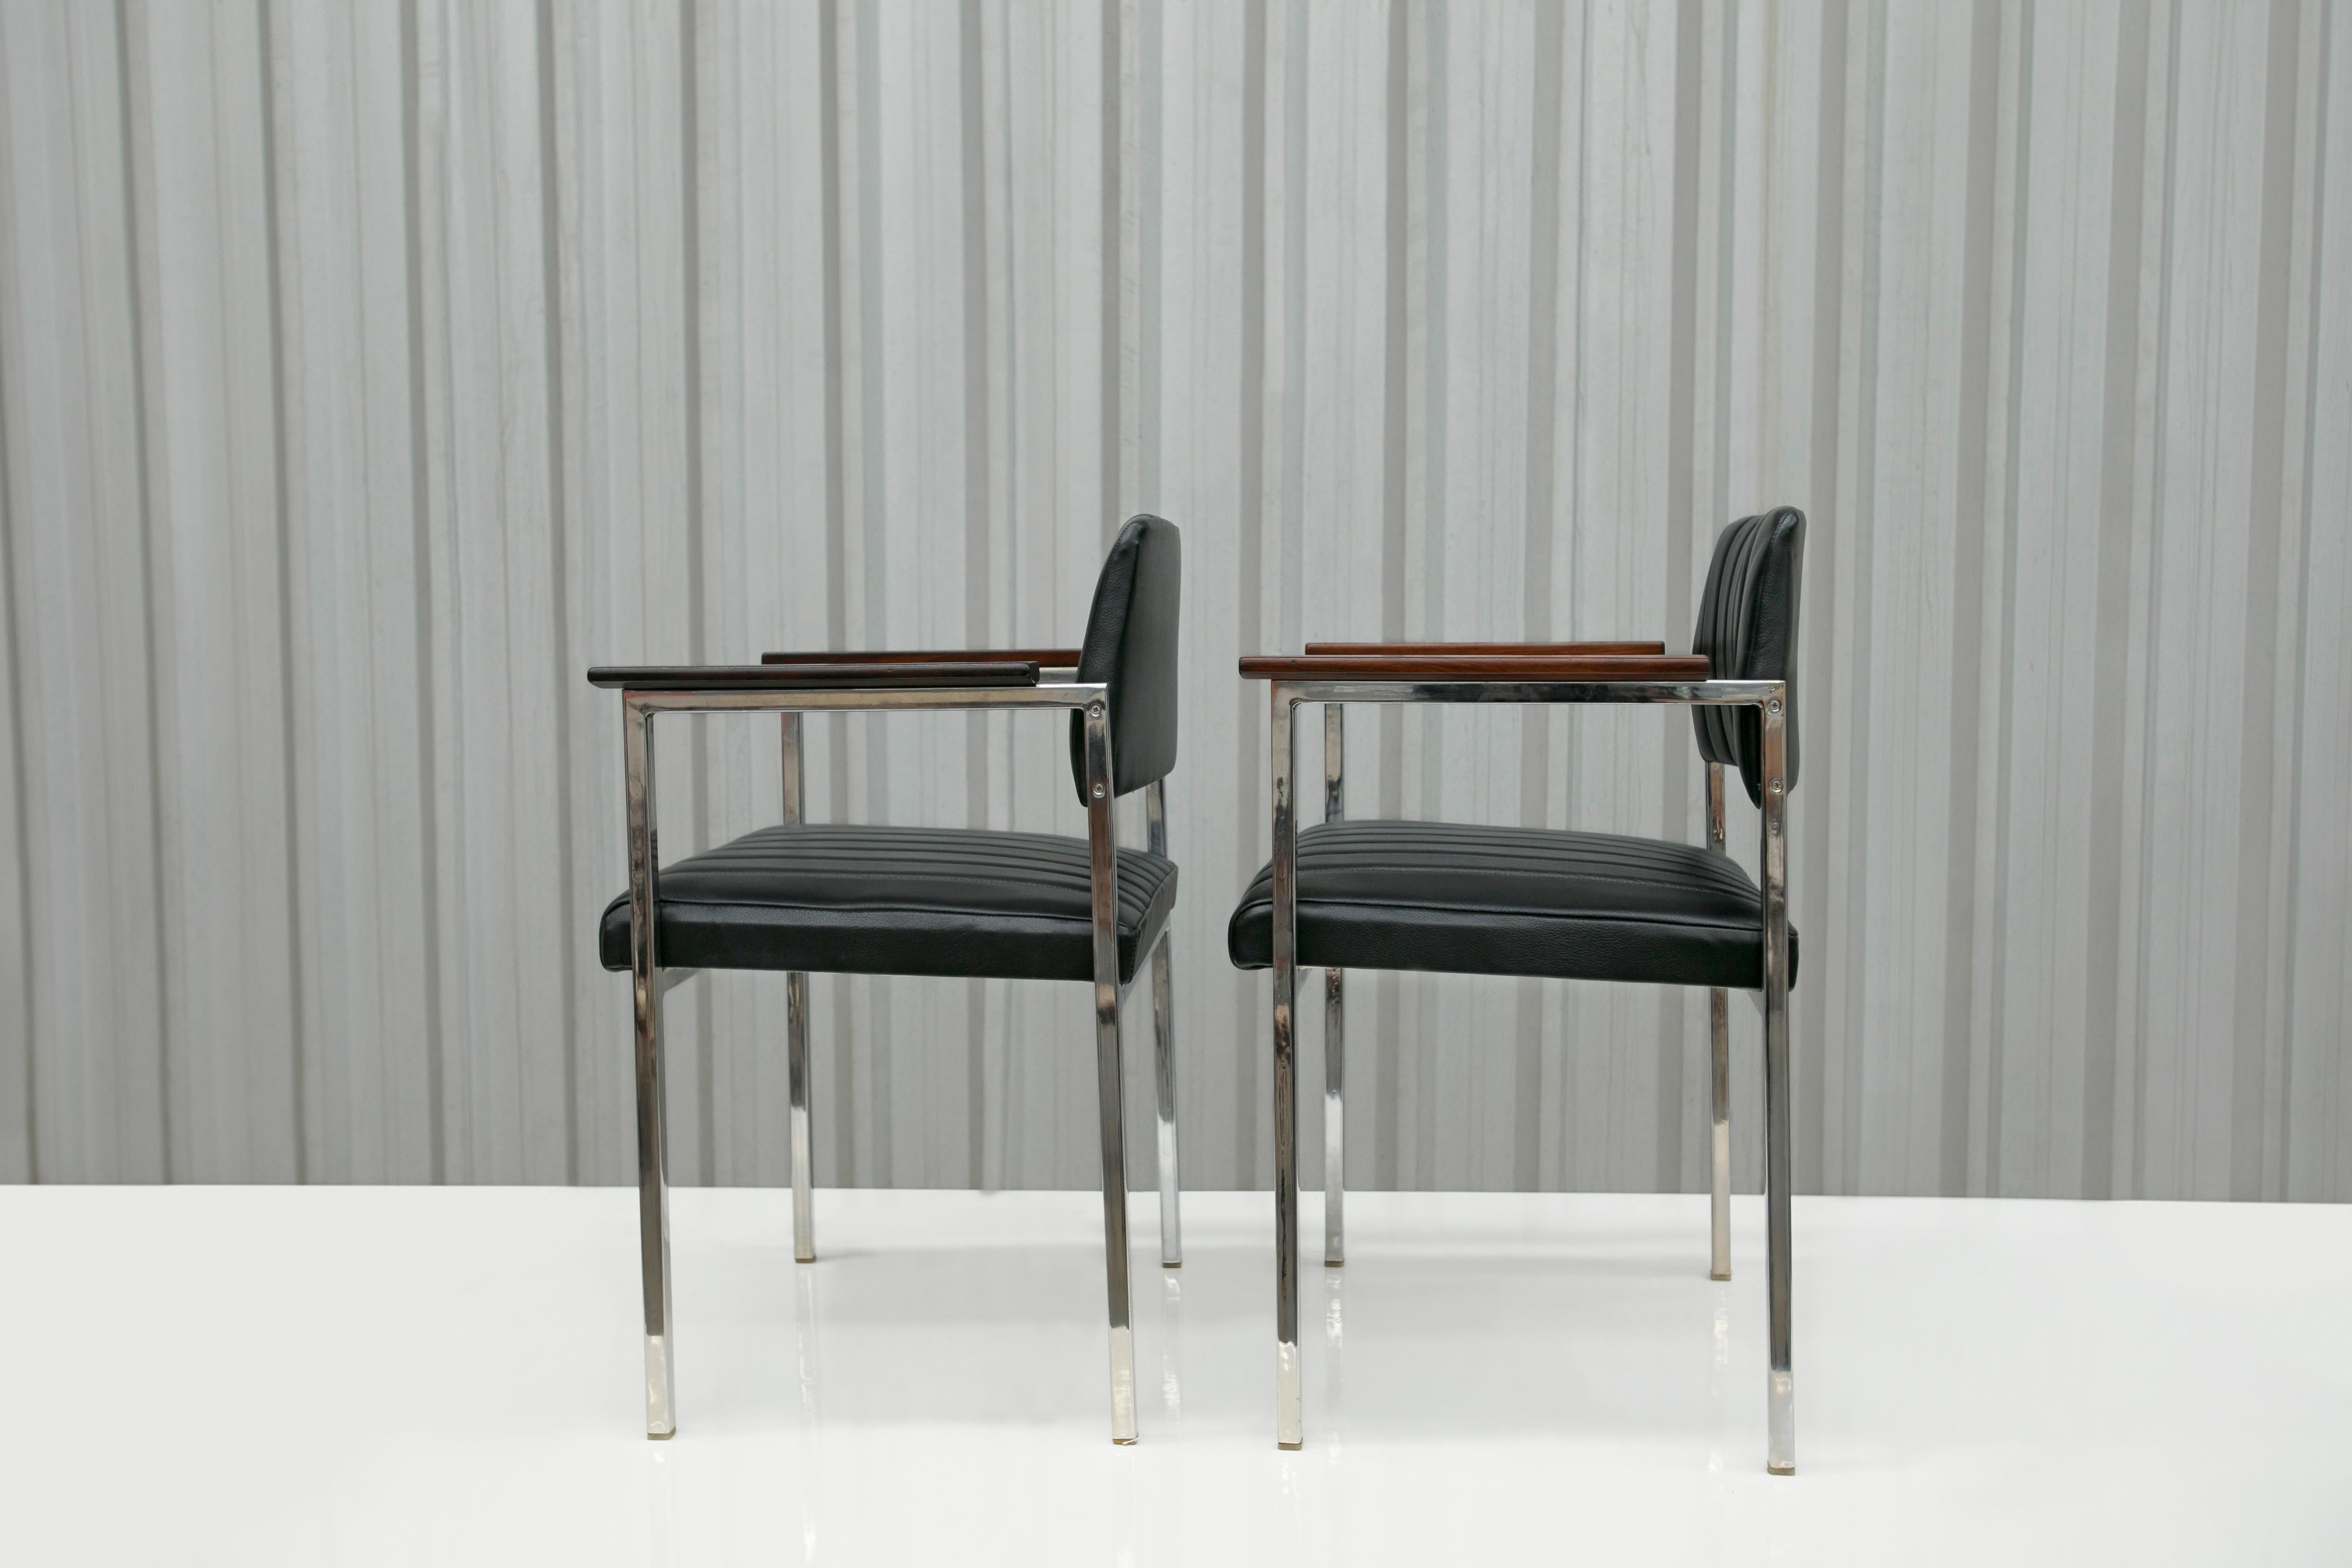 Brazilian Modern Armchairs in Steel, Leather & Wood Unknown, 1960s, Brazil In Good Condition For Sale In New York, NY